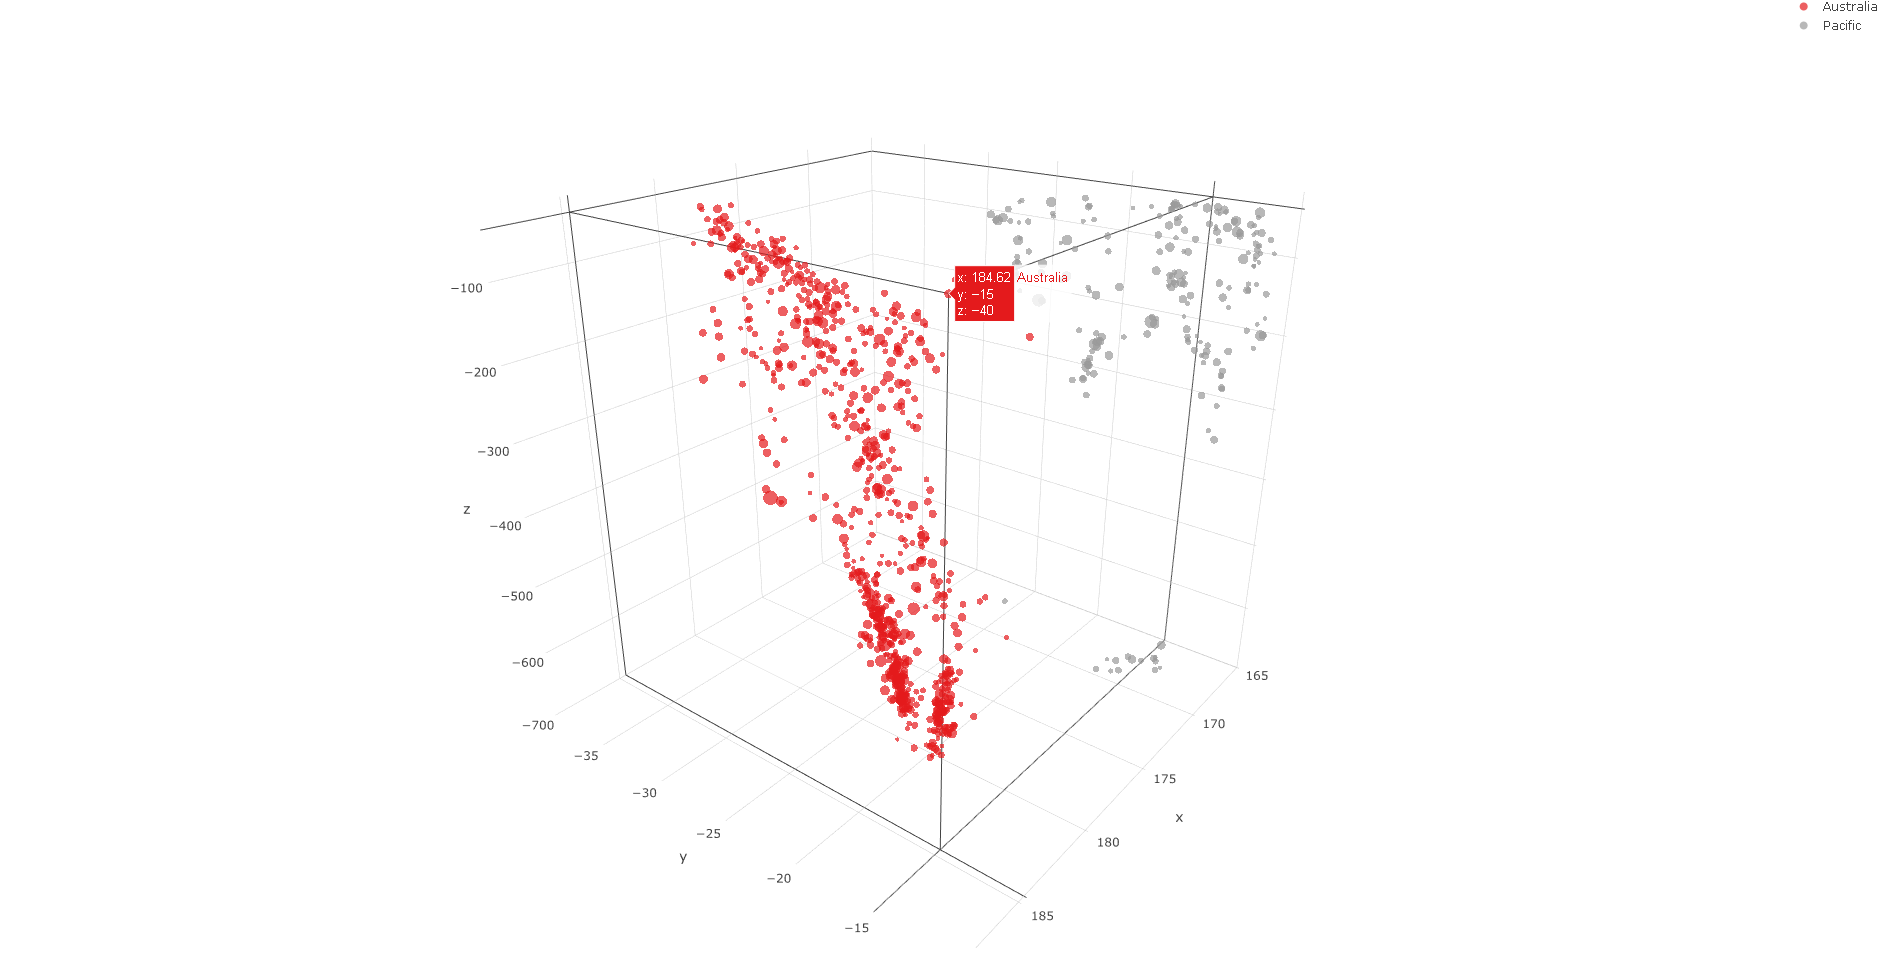 The built-in dataset quakes in RStudio had 1000 records of earthquakes nearby Fiji.